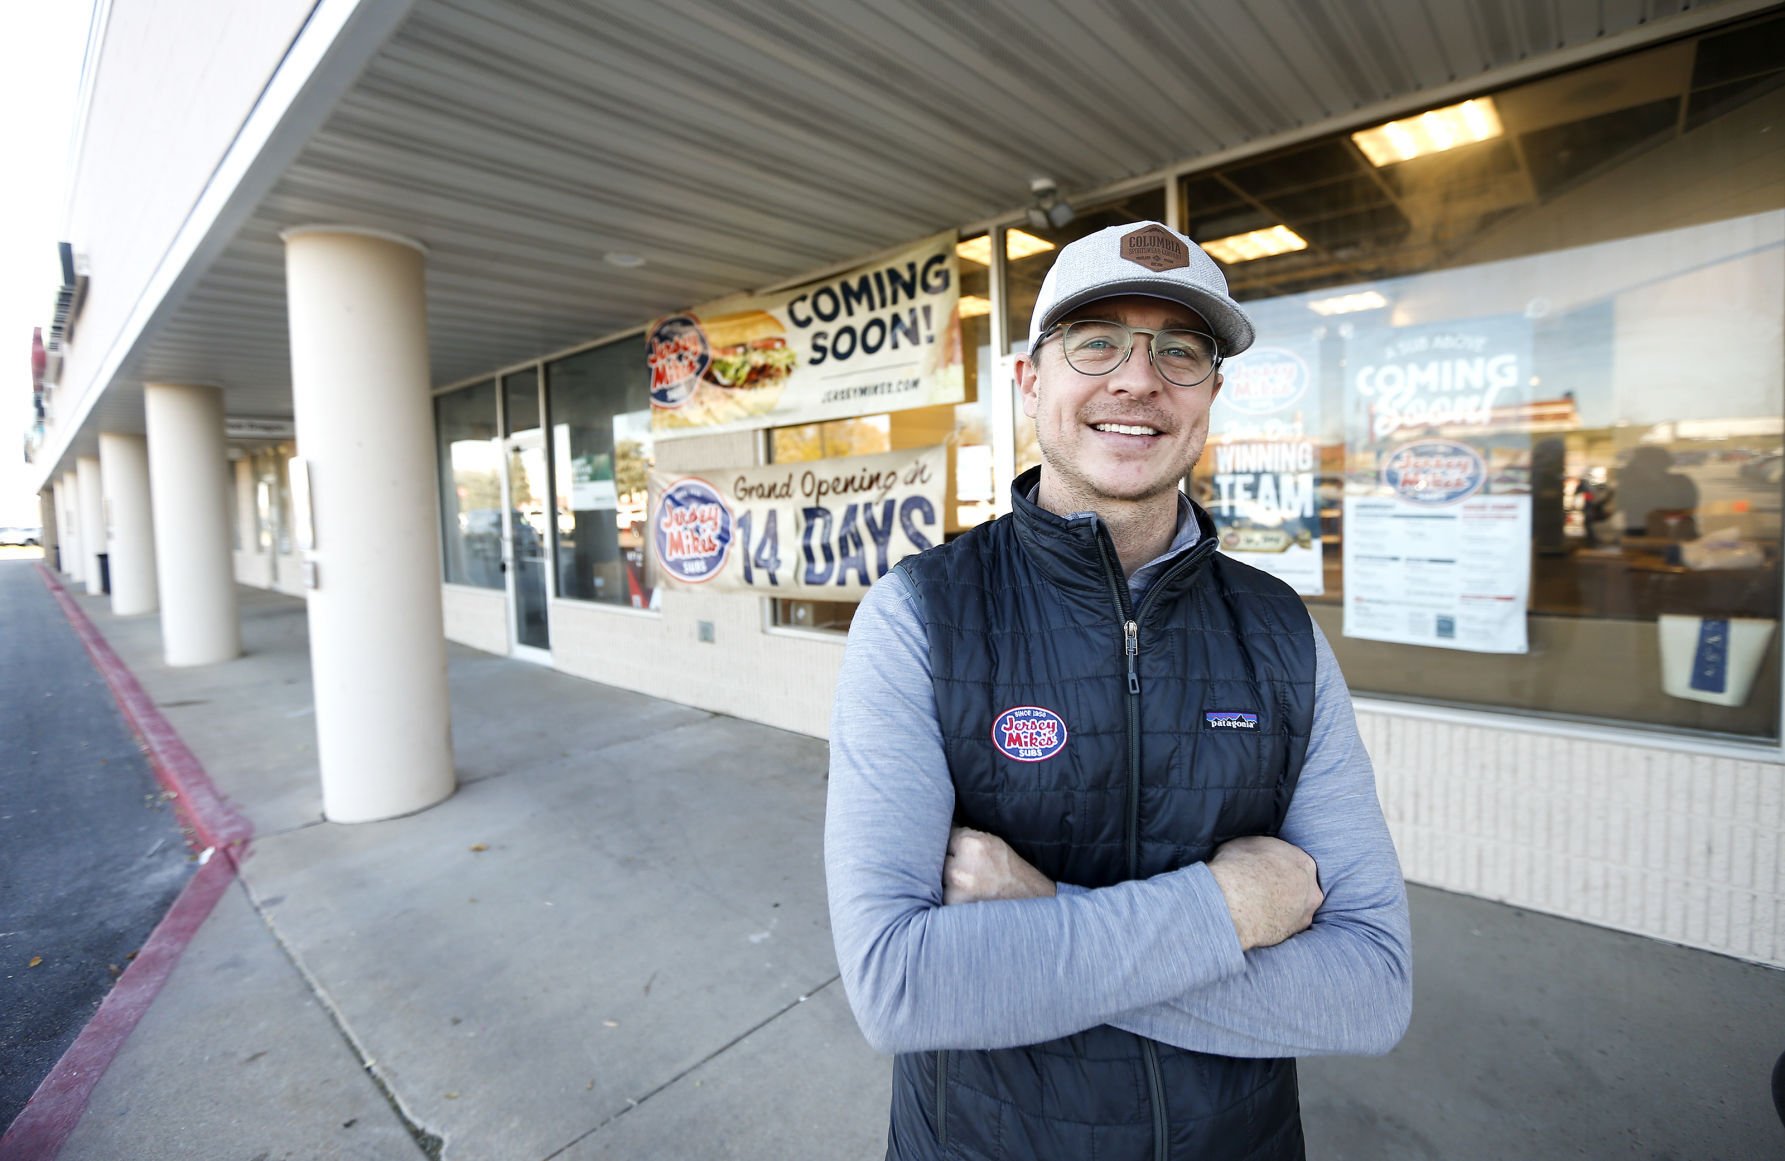 Aron Lees, co-owner of Jersey Mike’s Subs, stands in front of the business located in Warren Plaza in Dubuque. PHOTO CREDIT: Dave Kettering